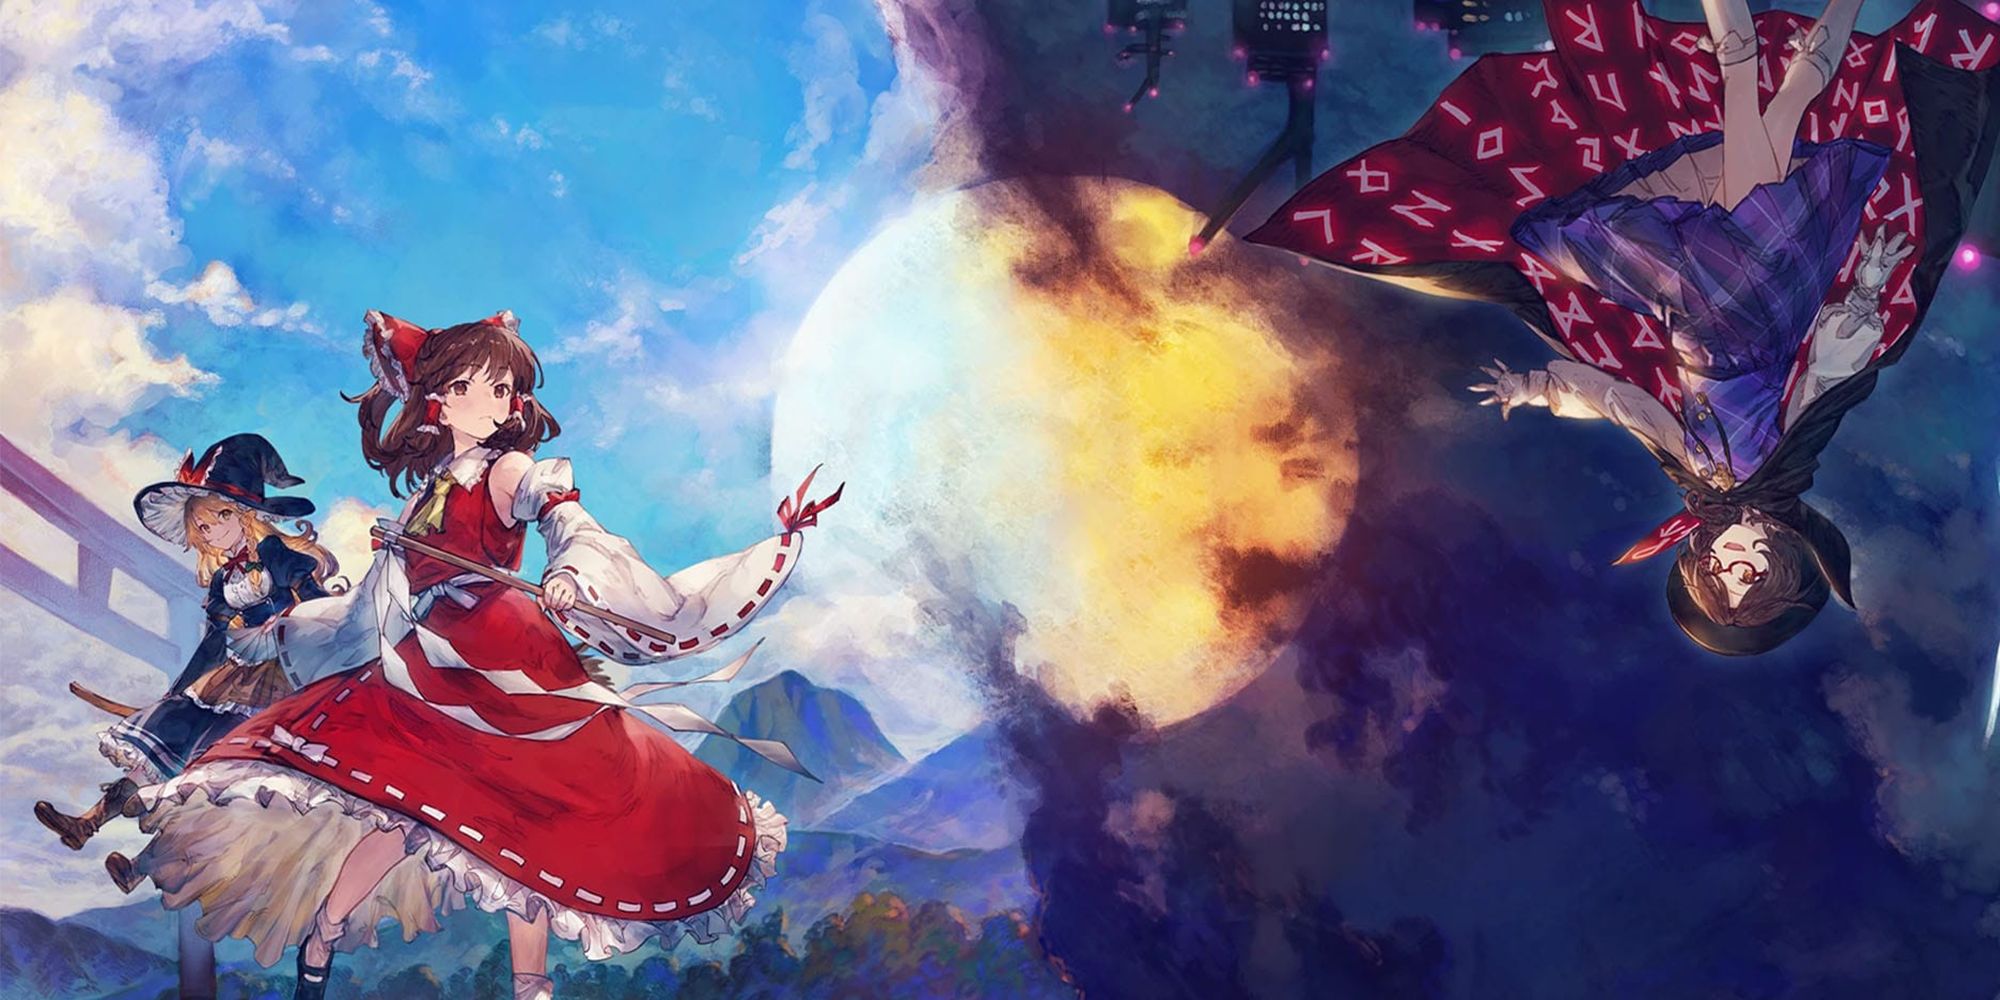 Reimu Hakurei, Marisa, and Touch of Touhou Shinsekai Longing For An Alternative World gaze at each other across two worlds.